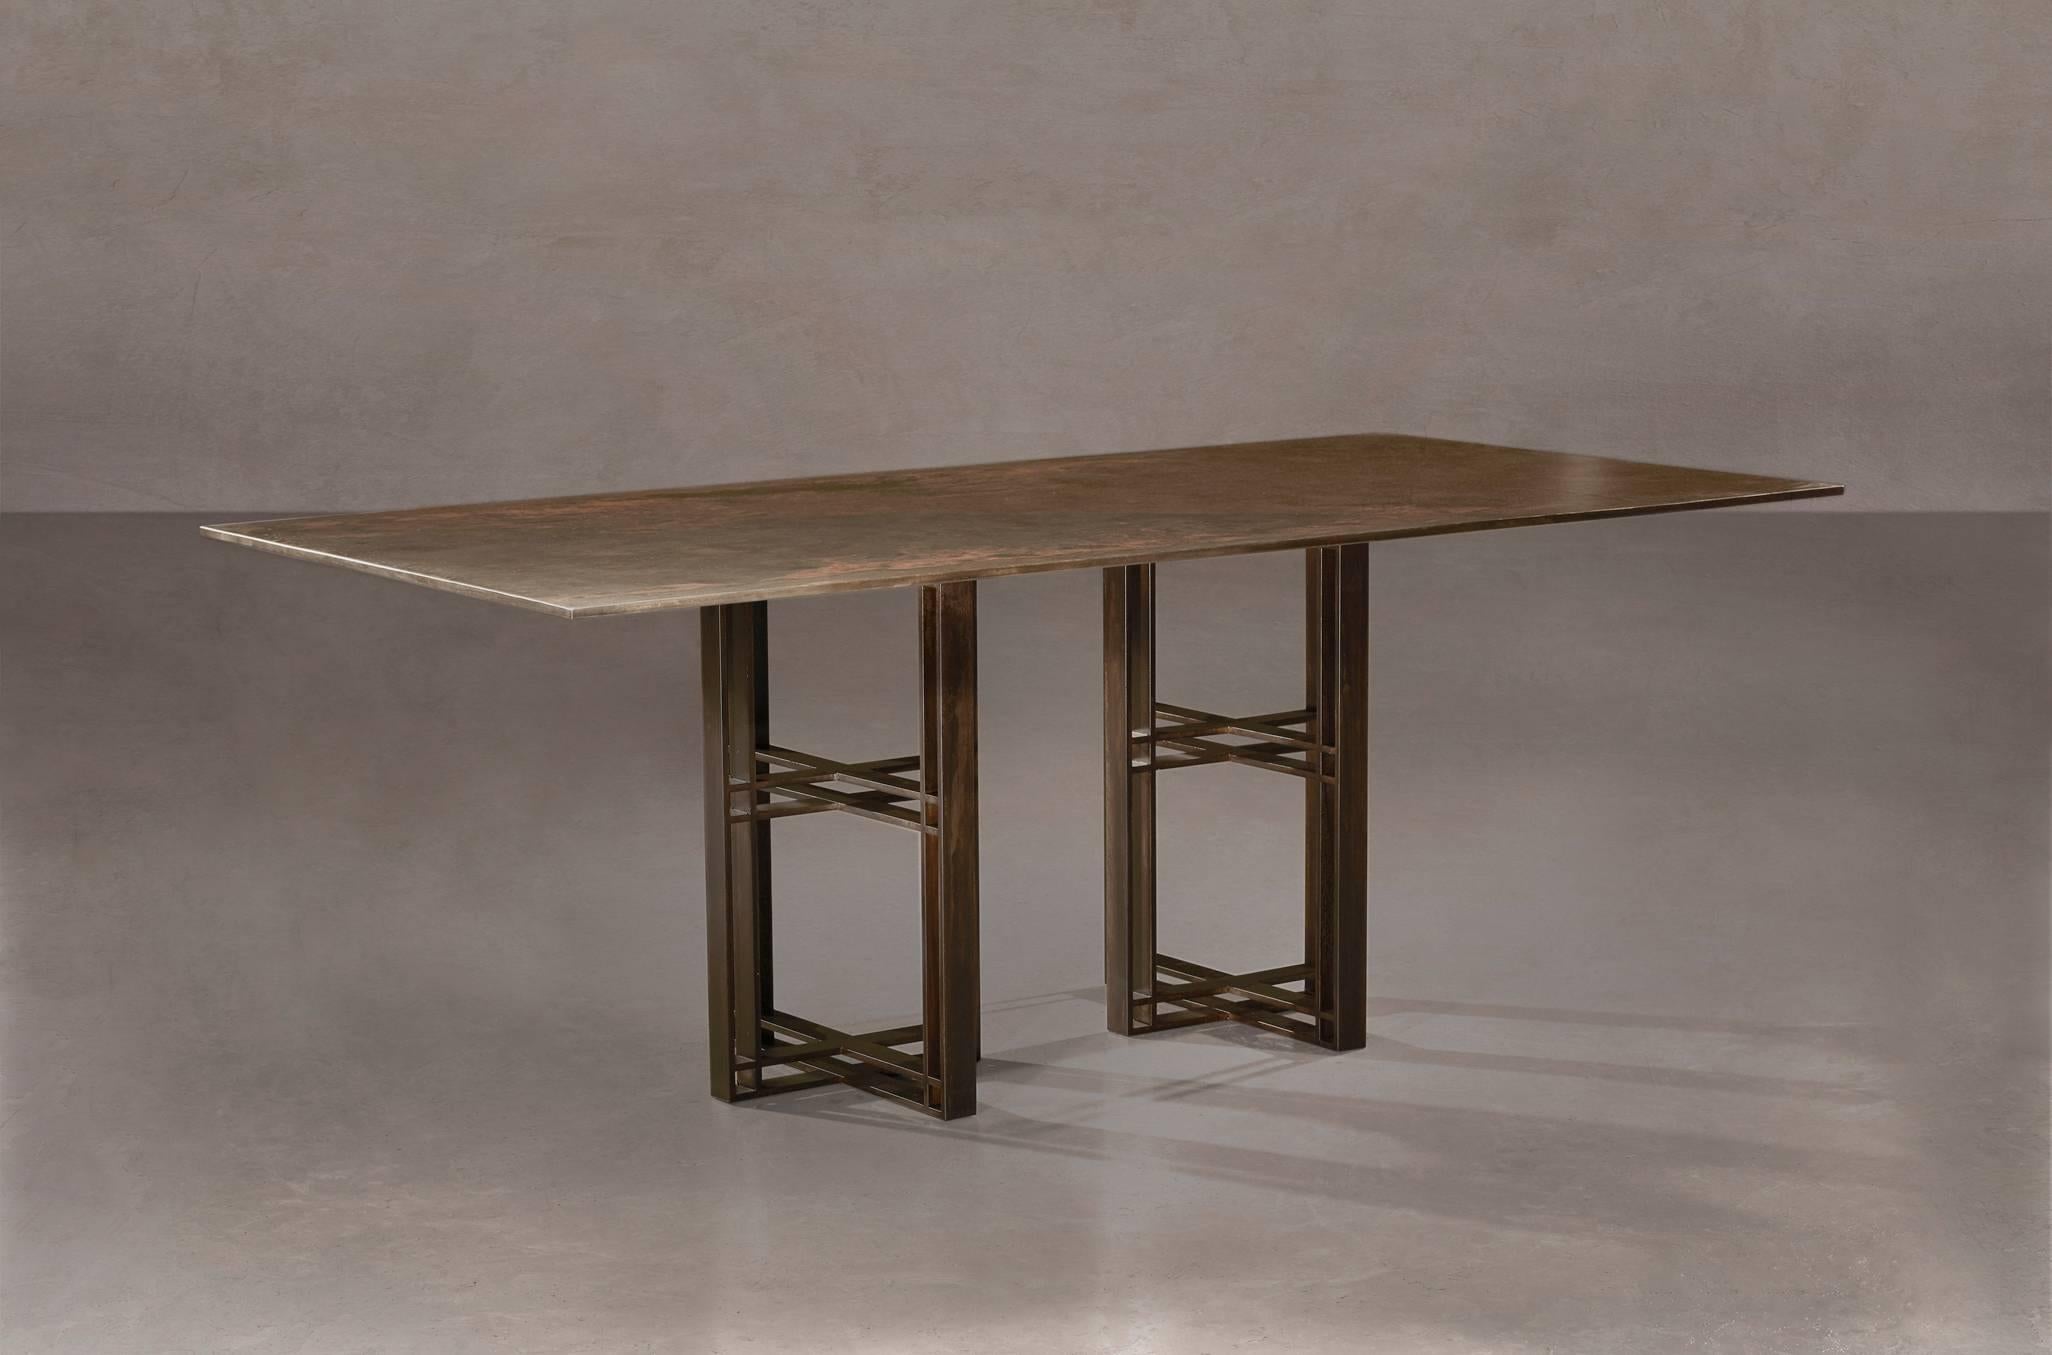 A dining table in patinated steel. Hand crafted in the North to order. Custom sizes and finishes are available.

Measures: 290 cm (width) x 75 cm (height) x 95 cm (depth).
Custom sizes available. Available with marble or timber top.

Made to order